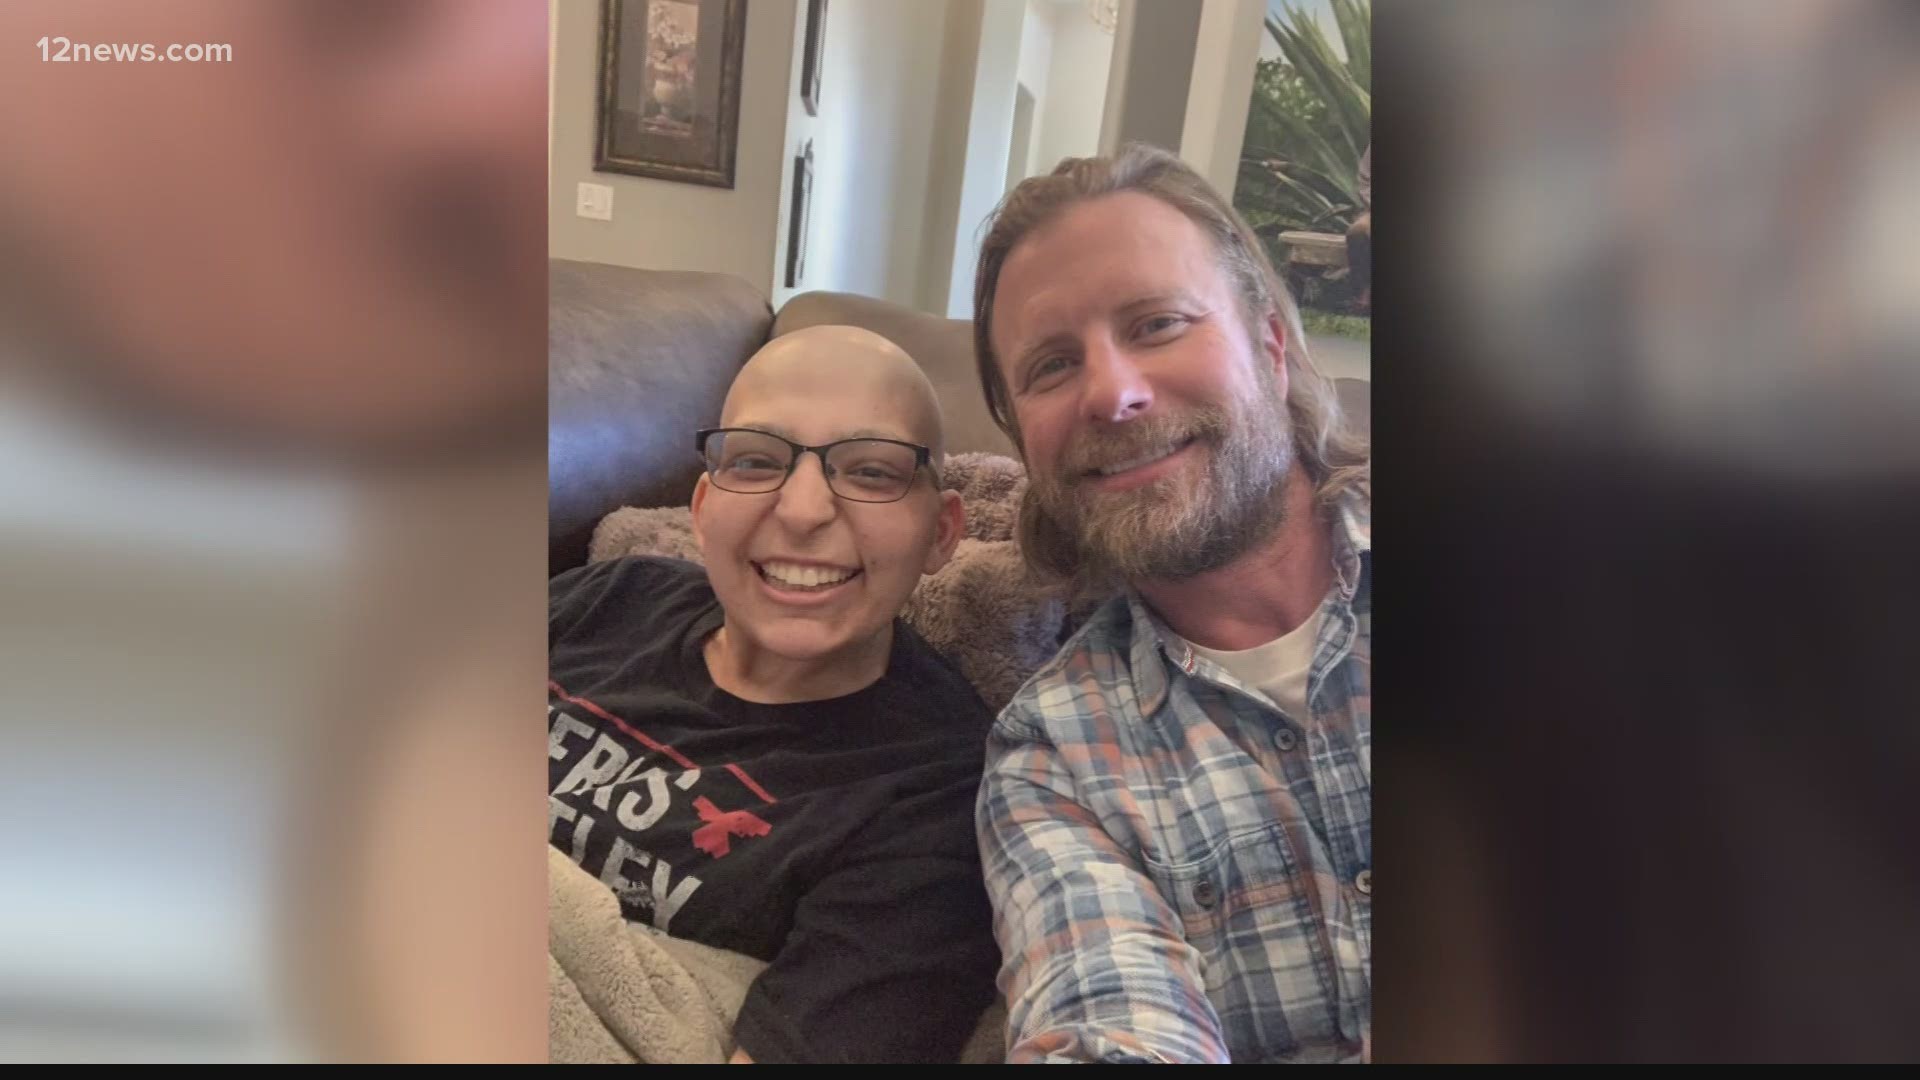 Country music star Dierks Bentley was able to comfort a Valley woman, Baylee, in her final days. Baylee's family says the visit led to a life-long friend for her.